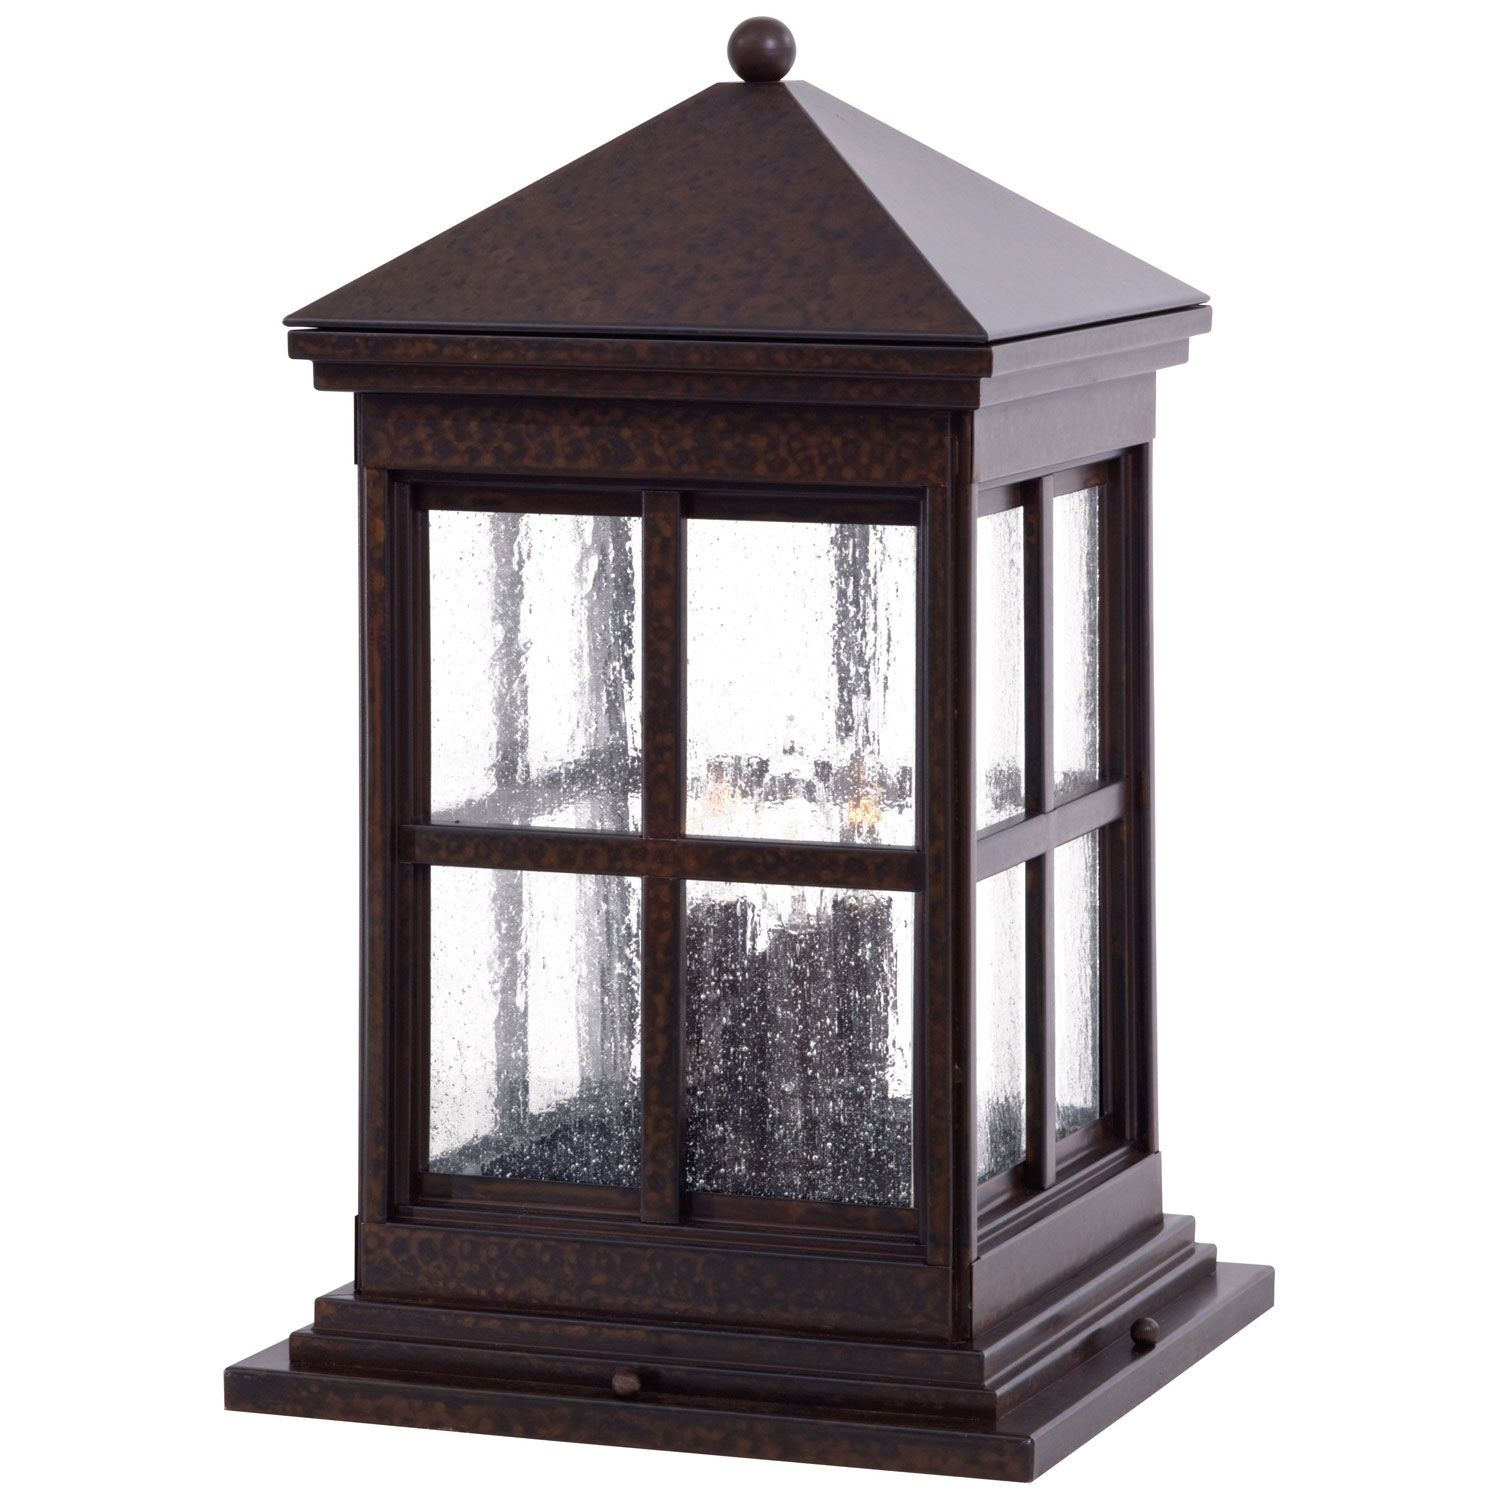 Berkeley Column Mount Exterior Light Minka Lavery Pier Mount Outdoor Within Contemporary Led Post Lights For Mini Garden (View 9 of 15)